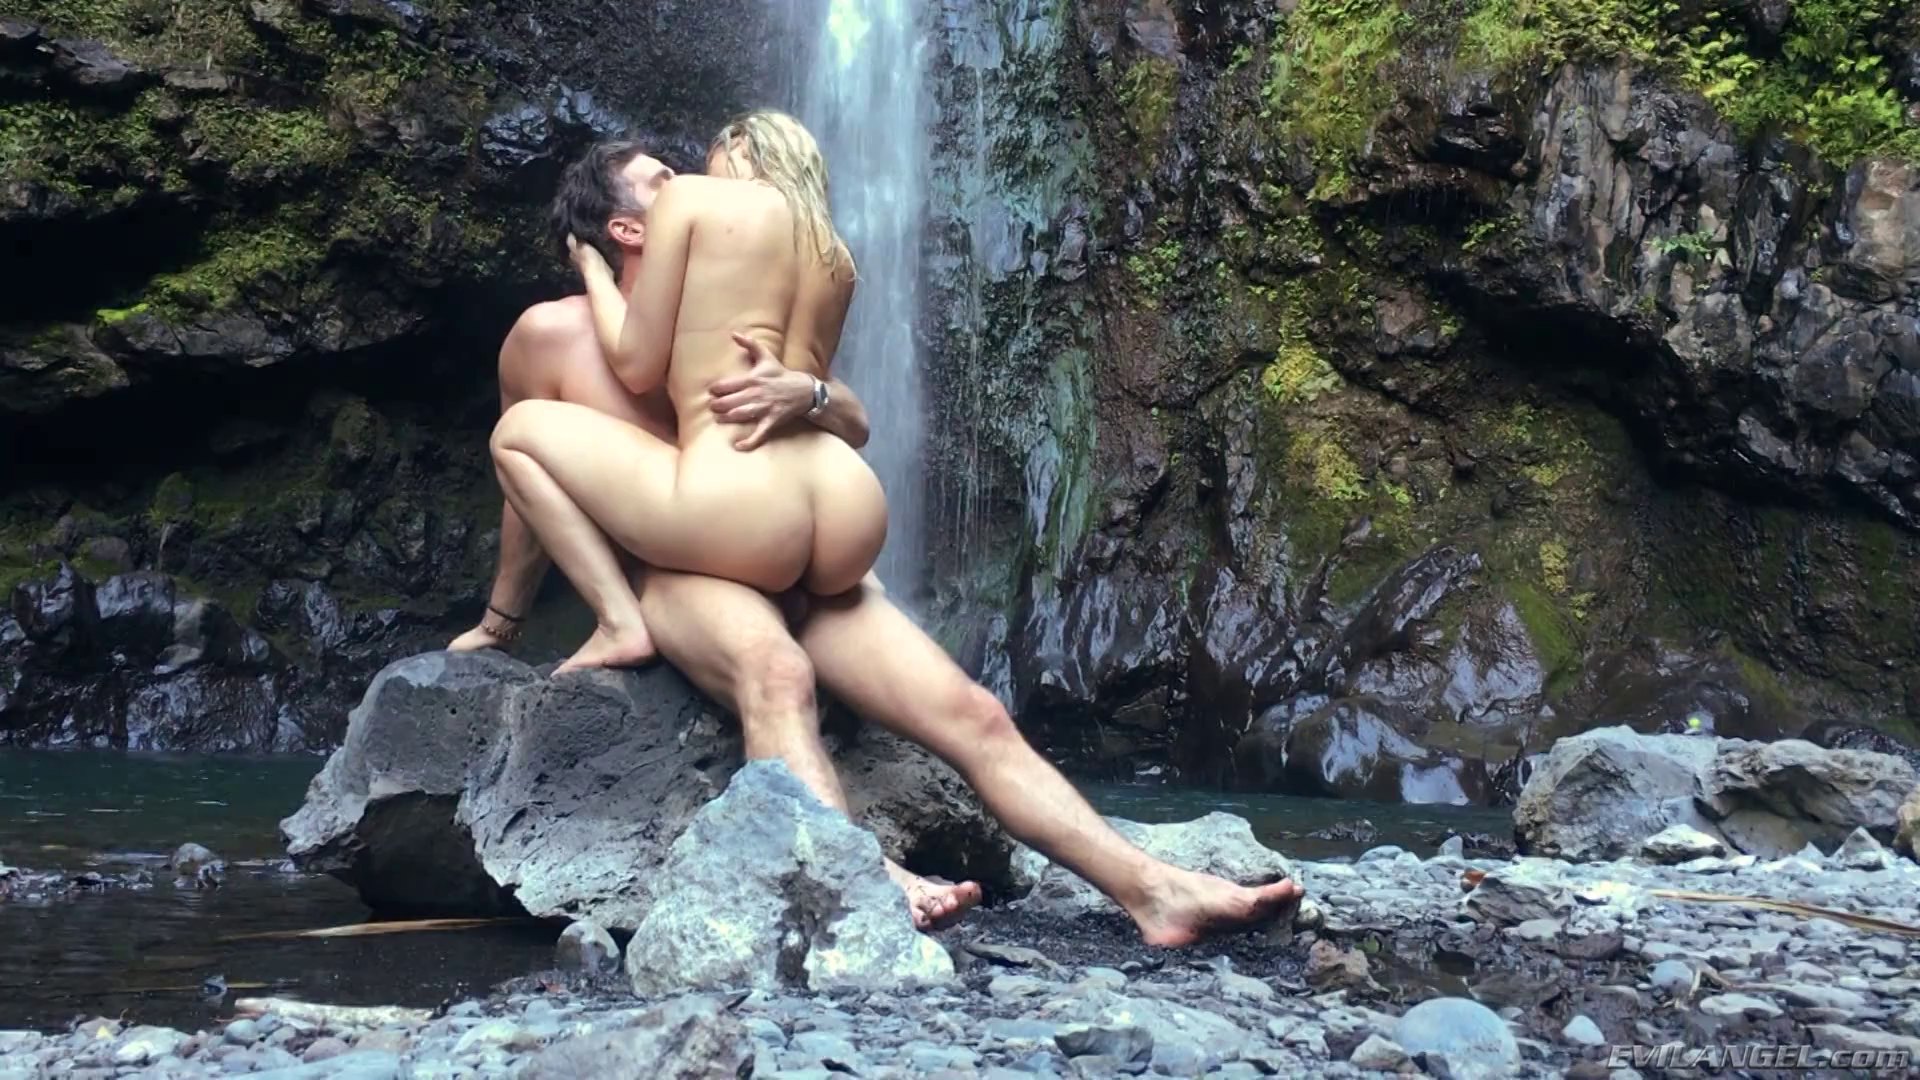 Beautiful blonde has the best banging session ever by the waterfall.